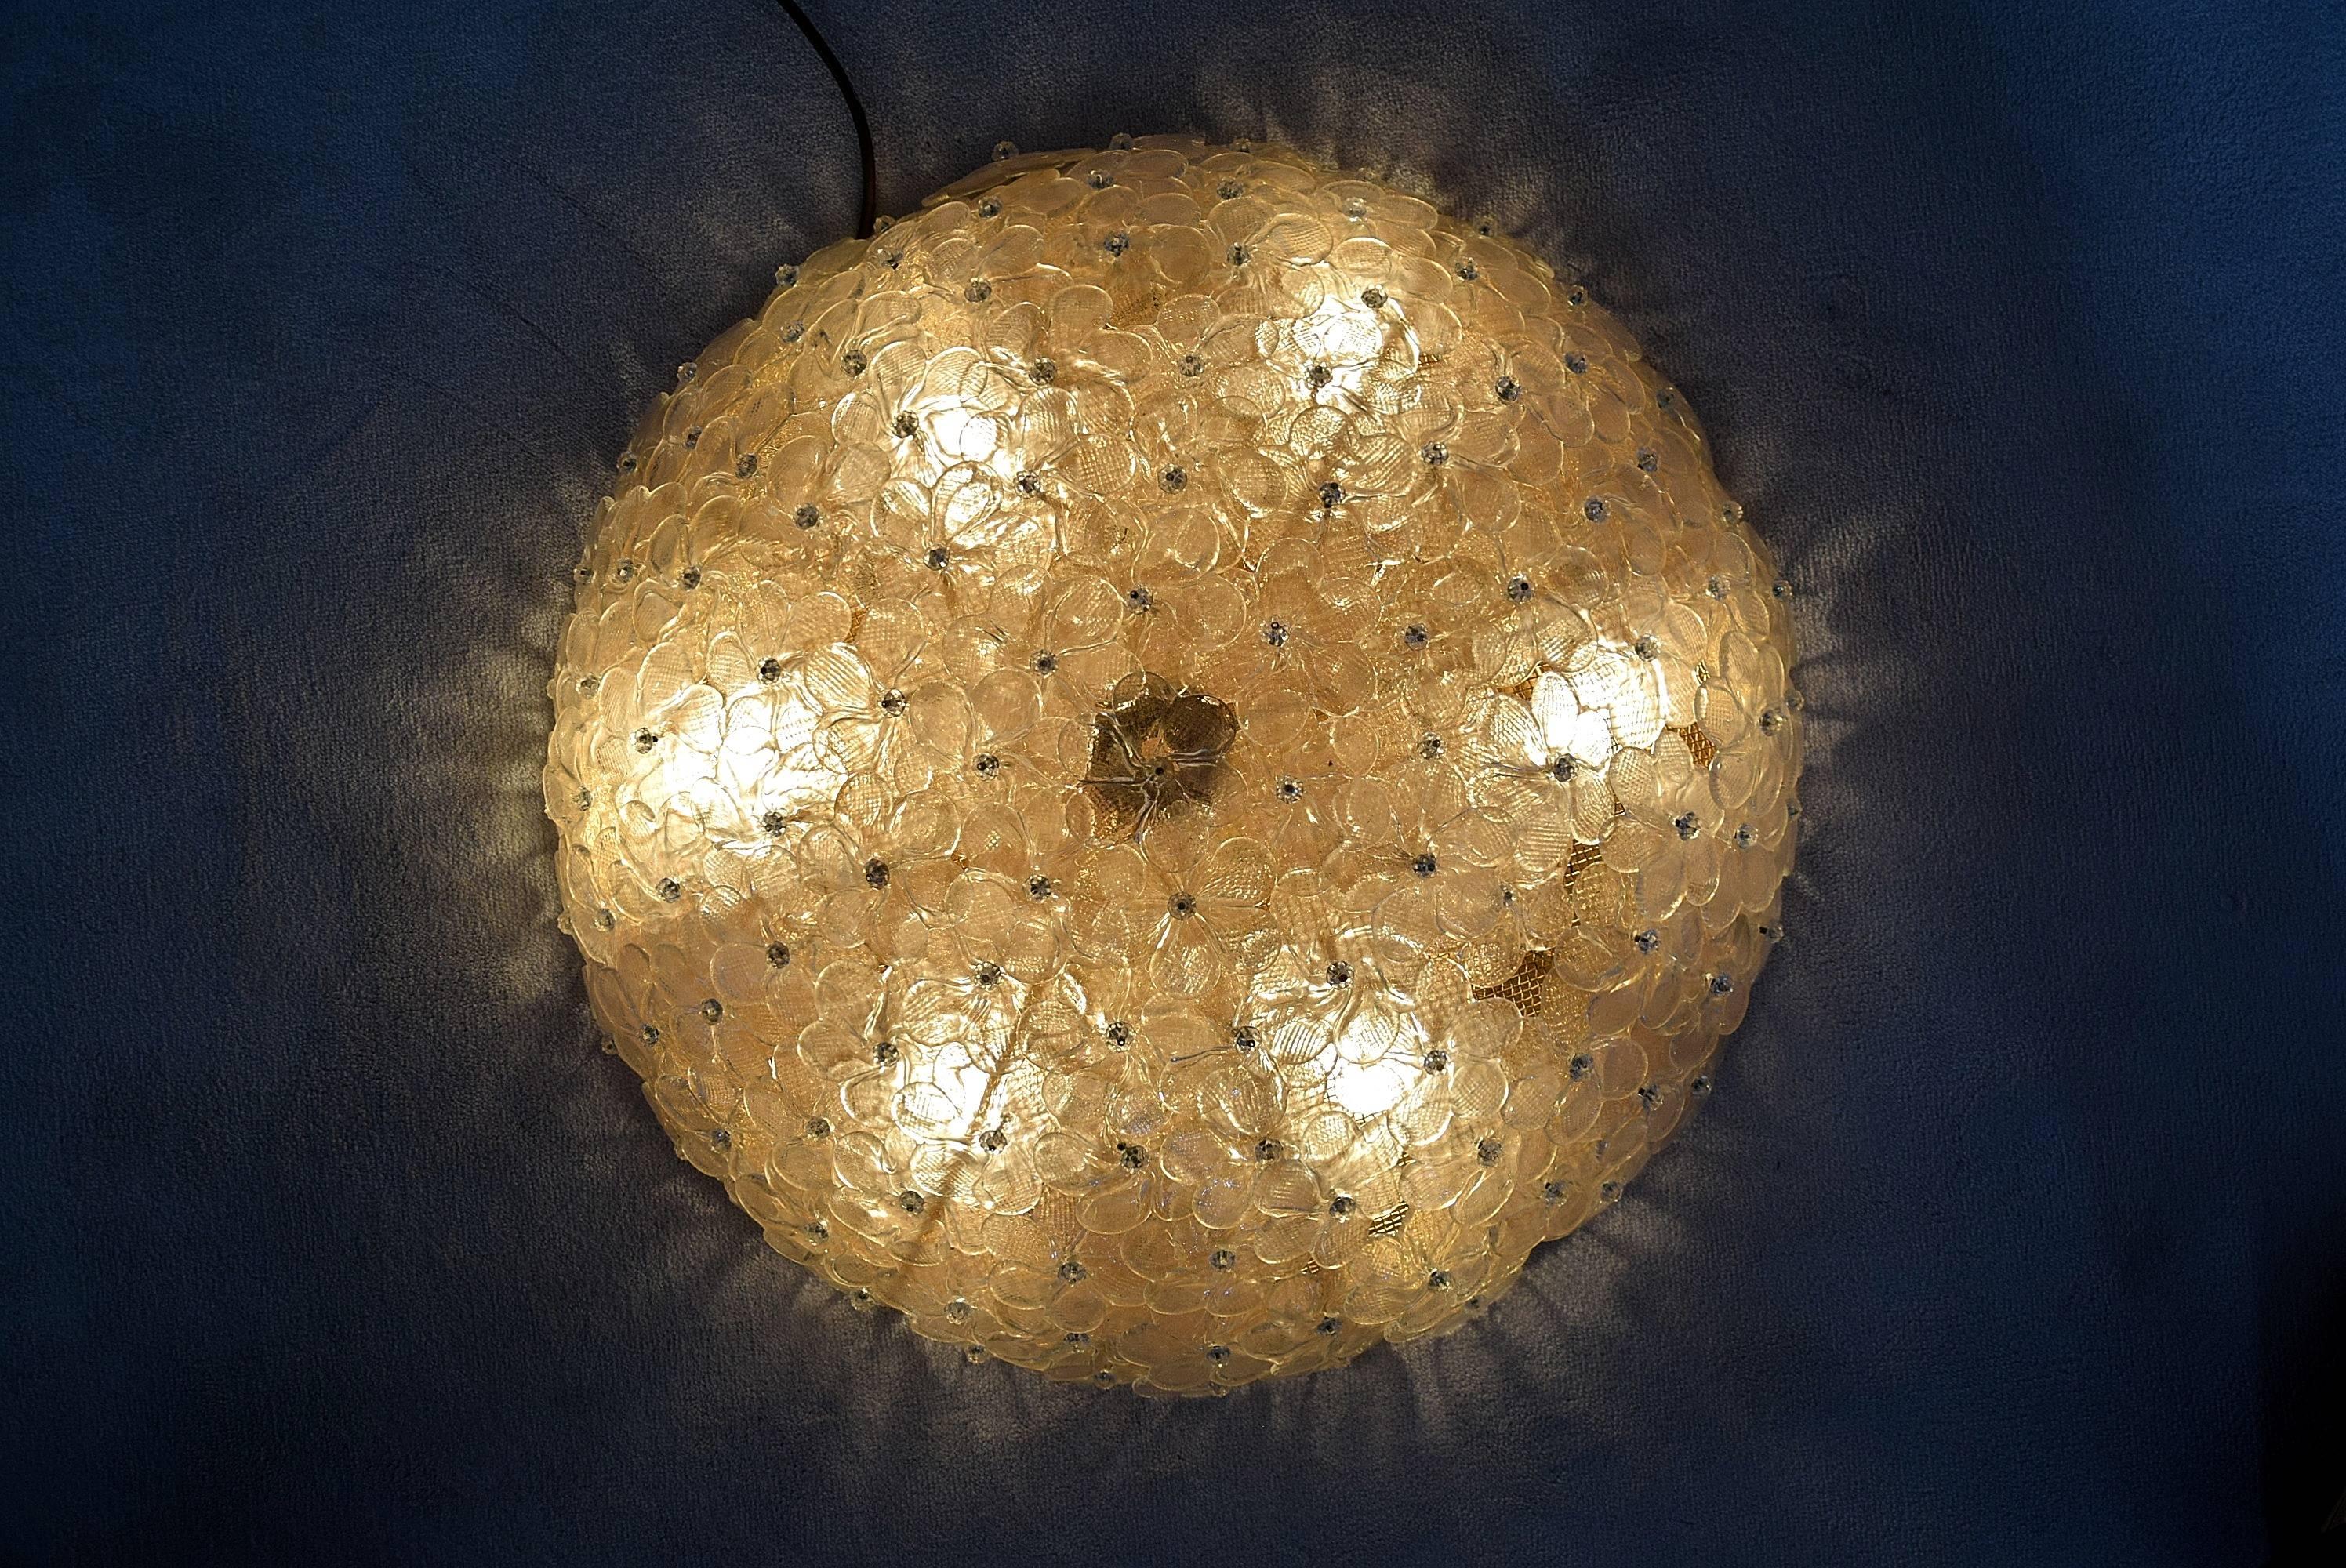 Flower ceiling lamp Seguso Murano
Gorgeous big handmade midcentury ceiling lamp “bunch of flowers” by Seguso, Murano, Italy.
The art glass flowers are semi transparant with gold details. This sophisticated piece is in perfect